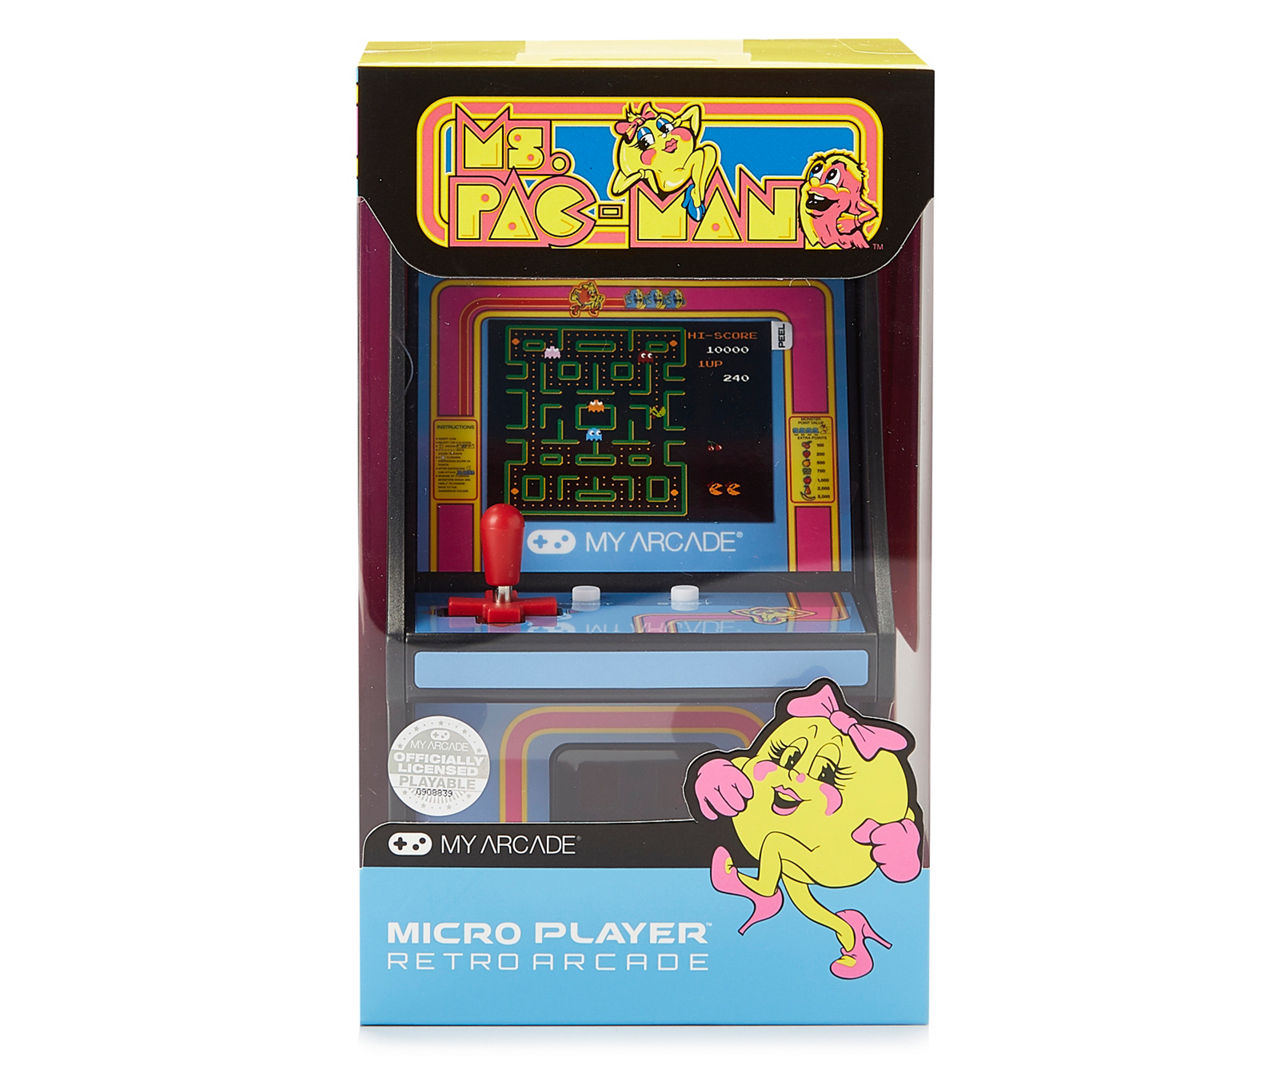 50 Years of Video Games: Pac-Man (Arcade) - The Game Hoard